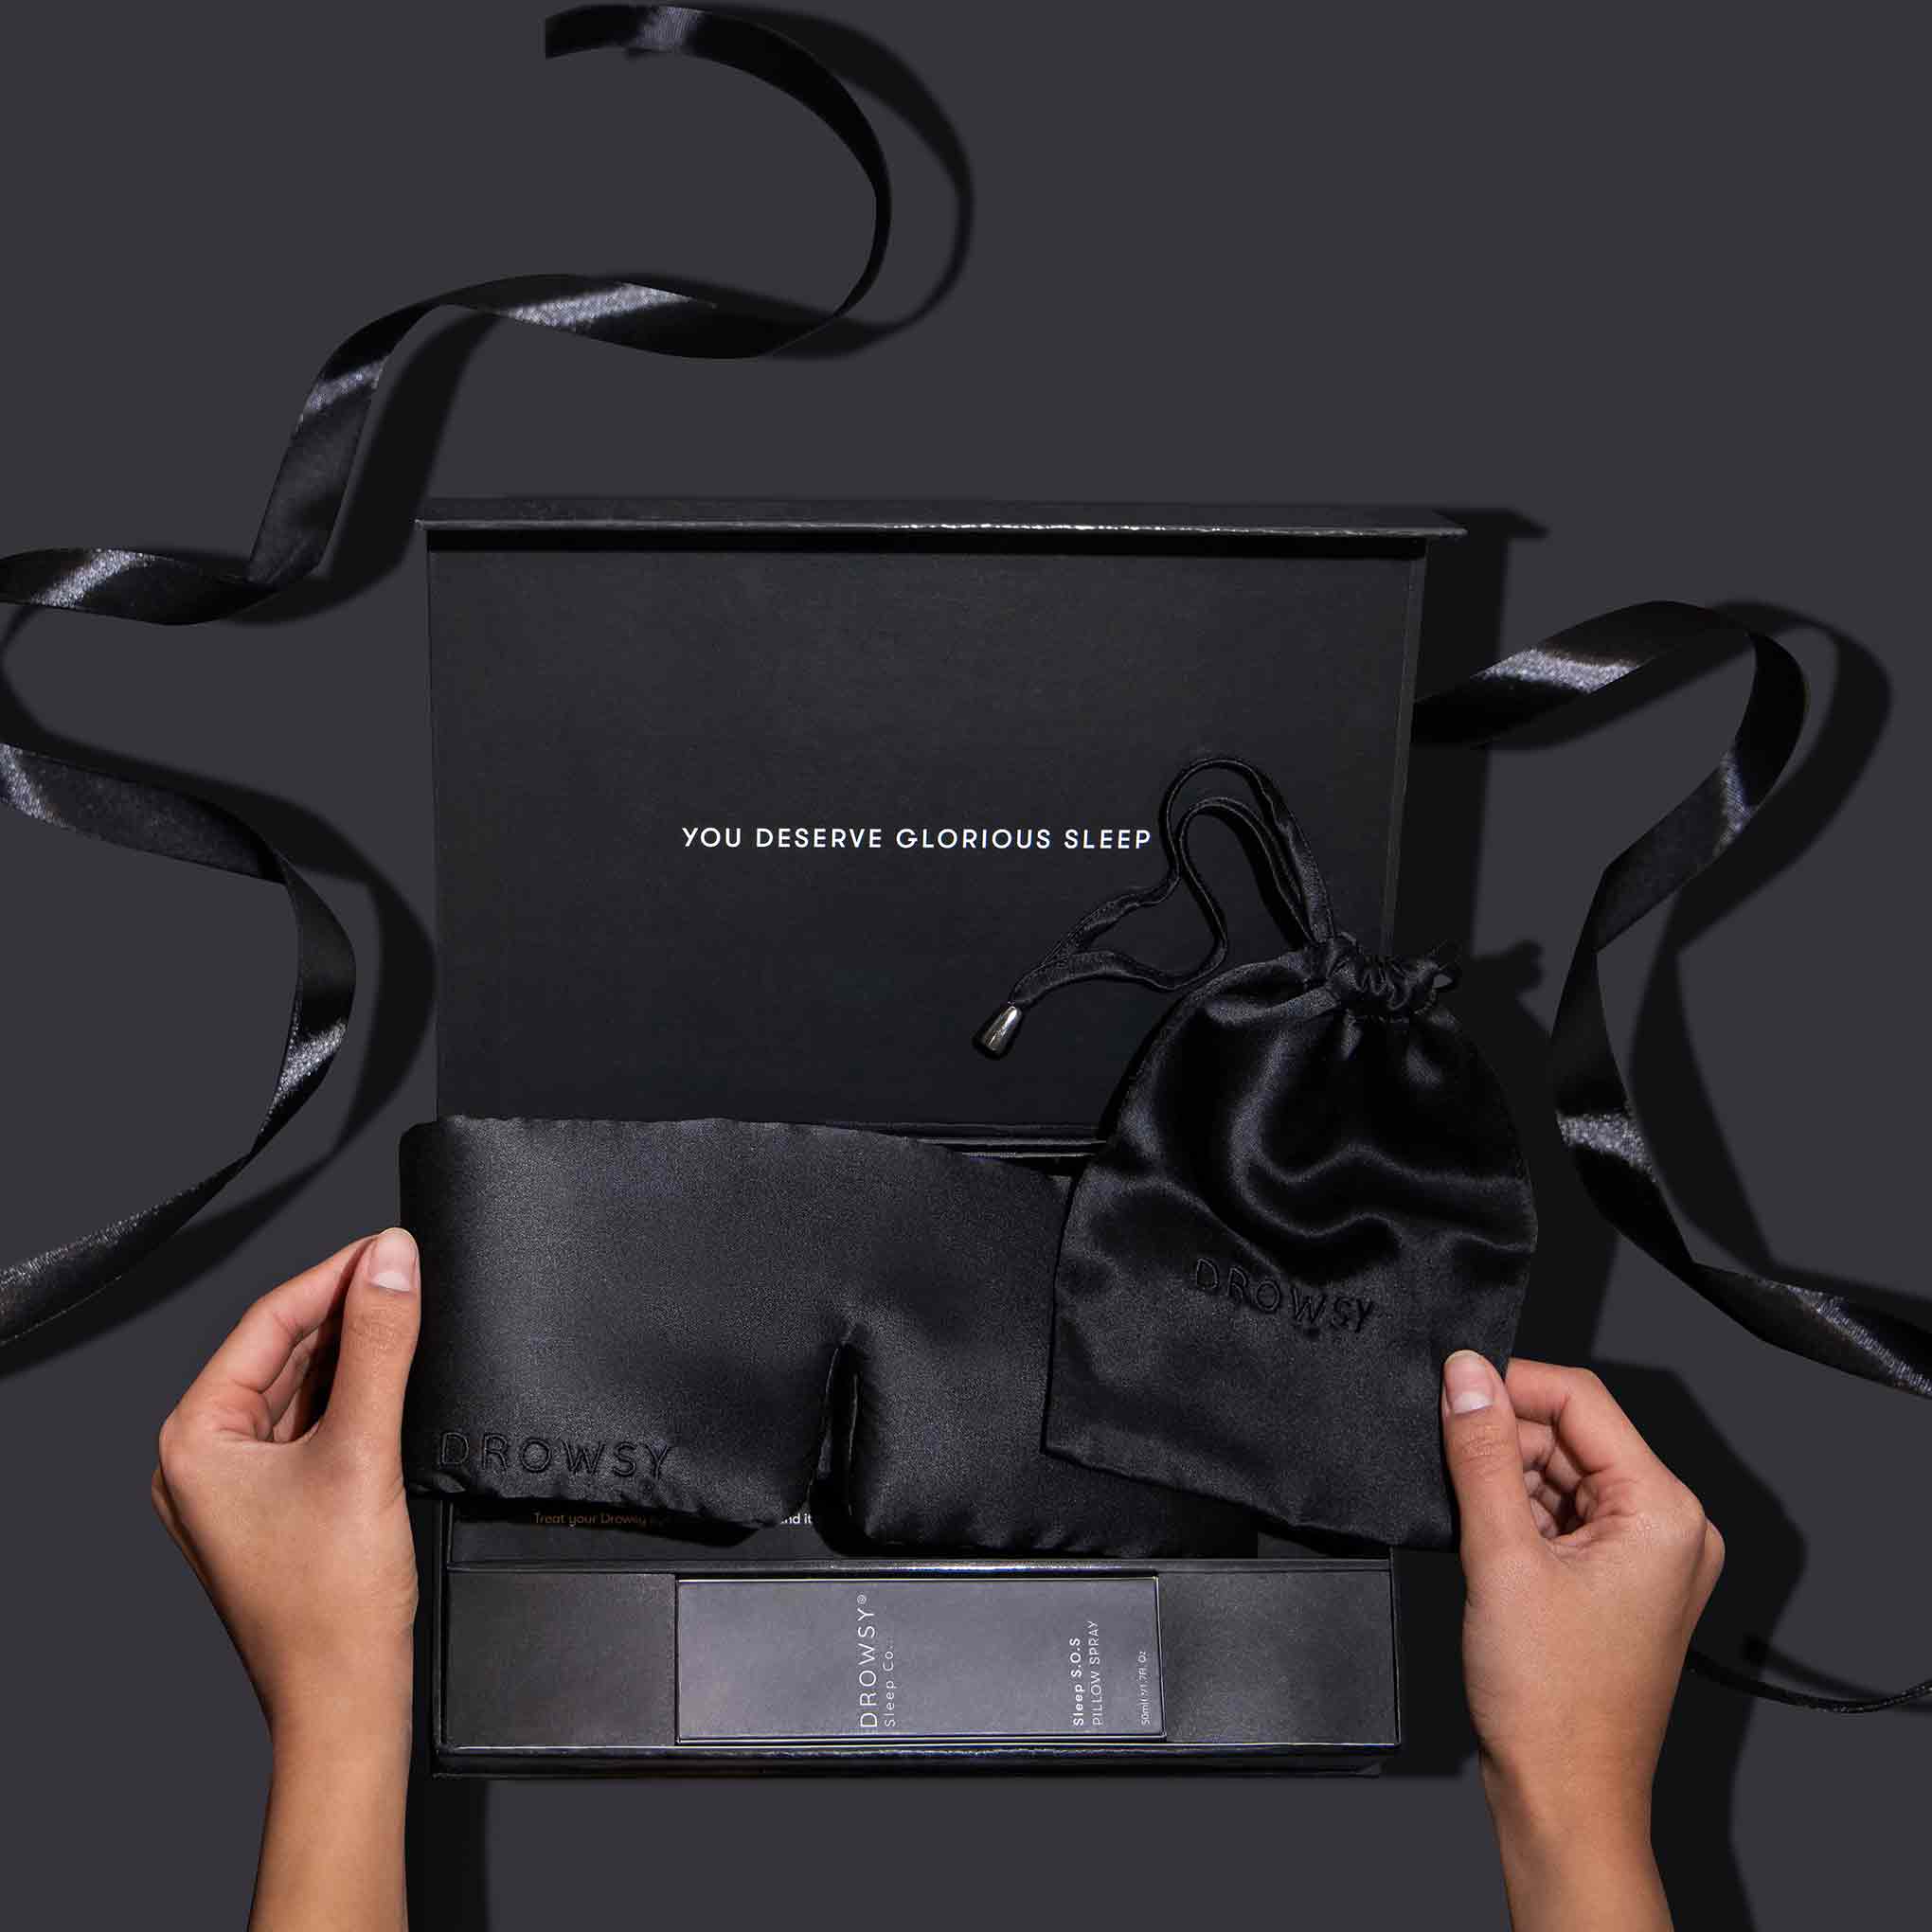 Drowsy Sleep Co. Black Jade Gift Set in black Box with Black Ribbons on a black background